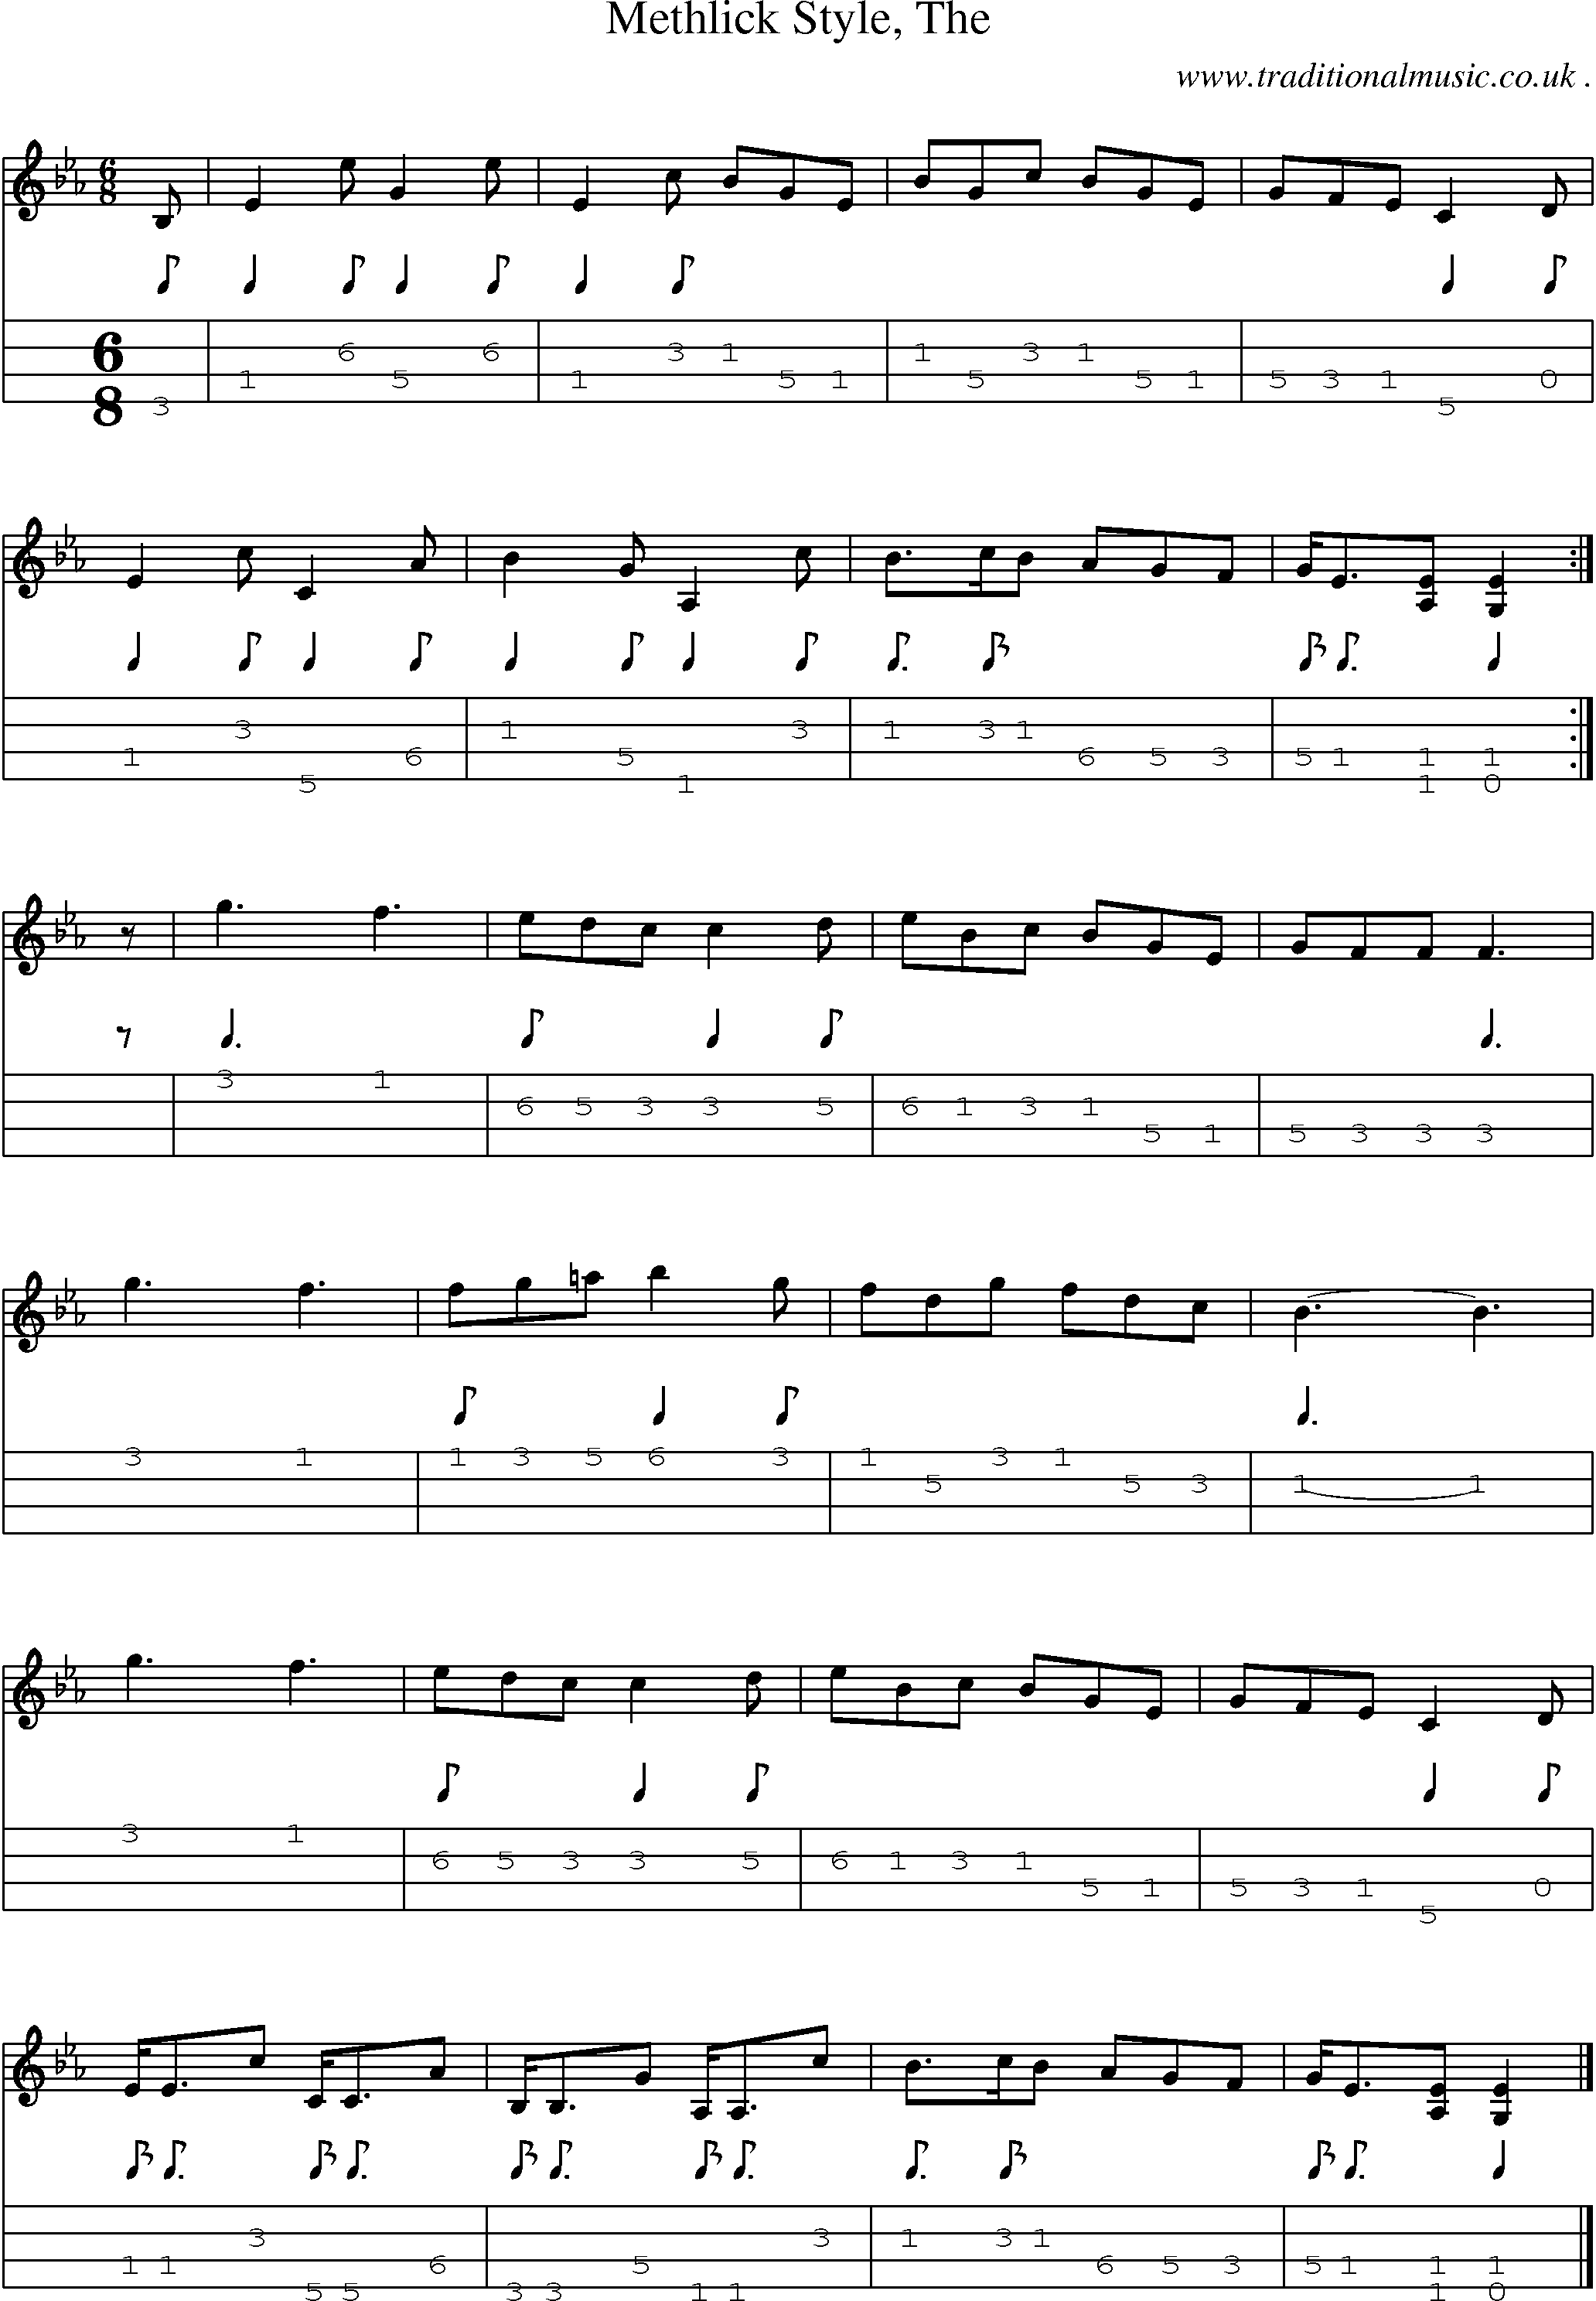 Sheet-music  score, Chords and Mandolin Tabs for Methlick Style The